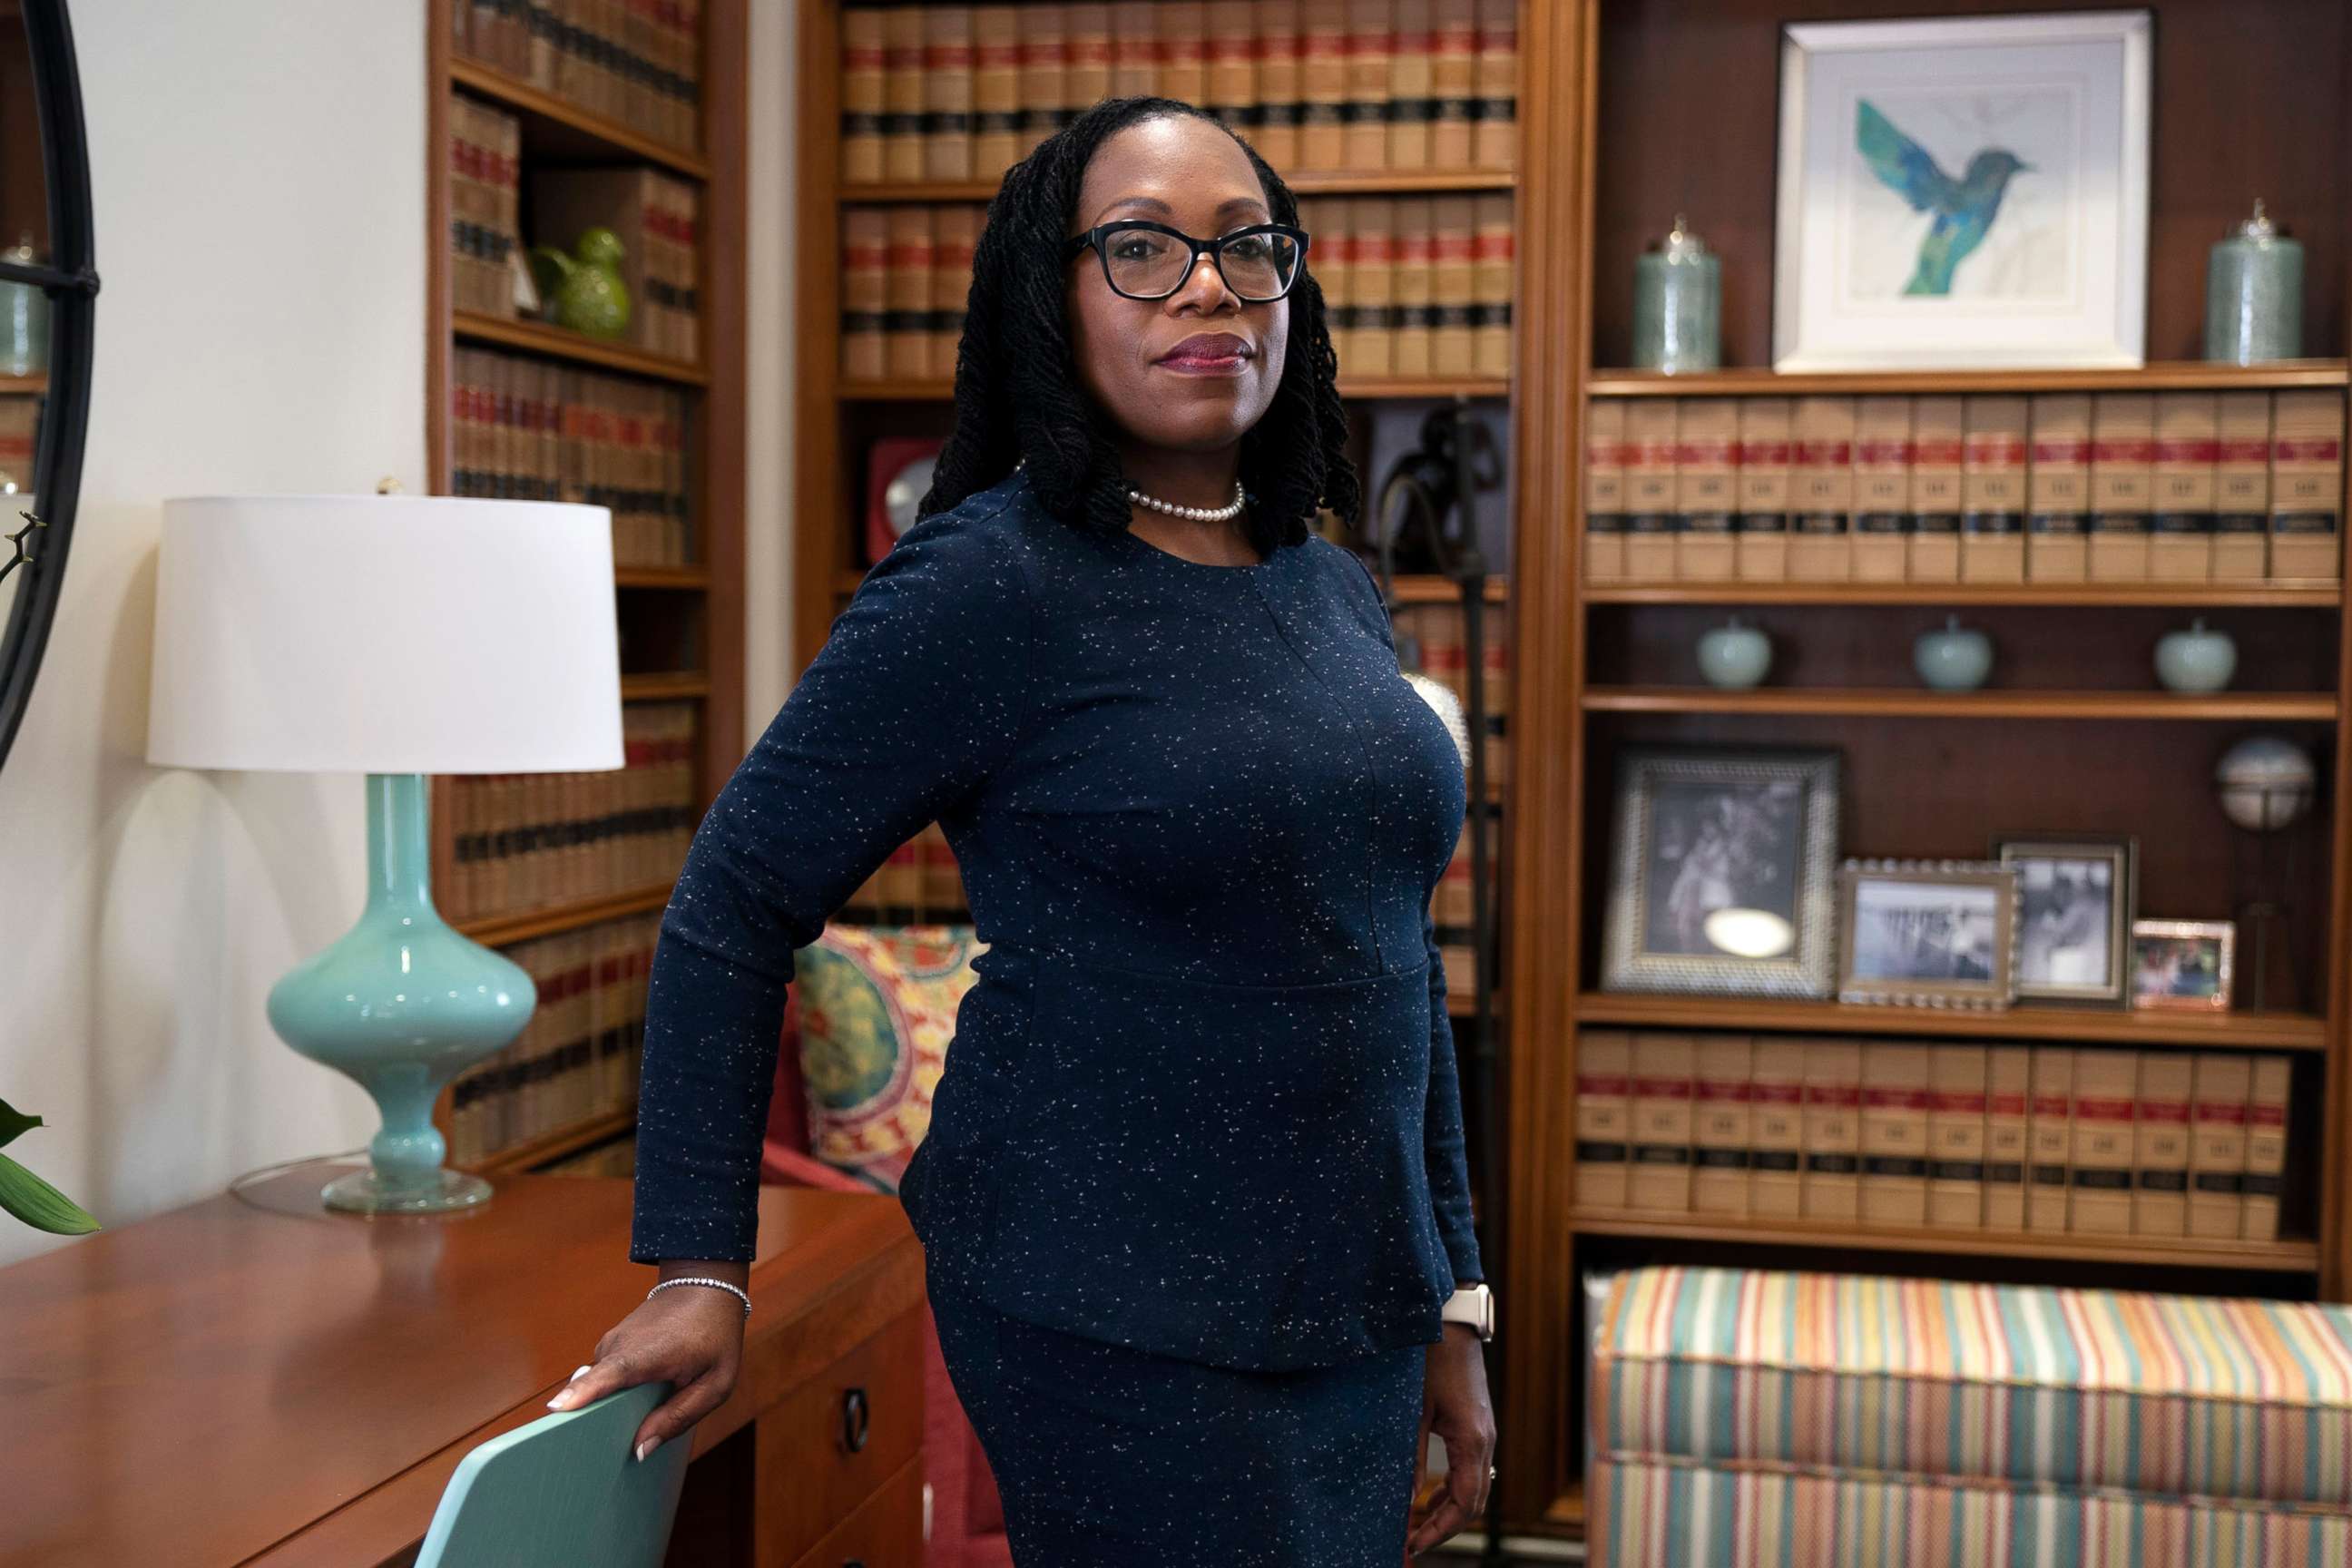 PHOTO: Judge Ketanji Brown Jackson, a U.S. Circuit Judge on the U.S. Court of Appeals for the District of Columbia Circuit, poses for a portrait, on Feb., 18, 2022, in her office at the court in Washington, D.C.